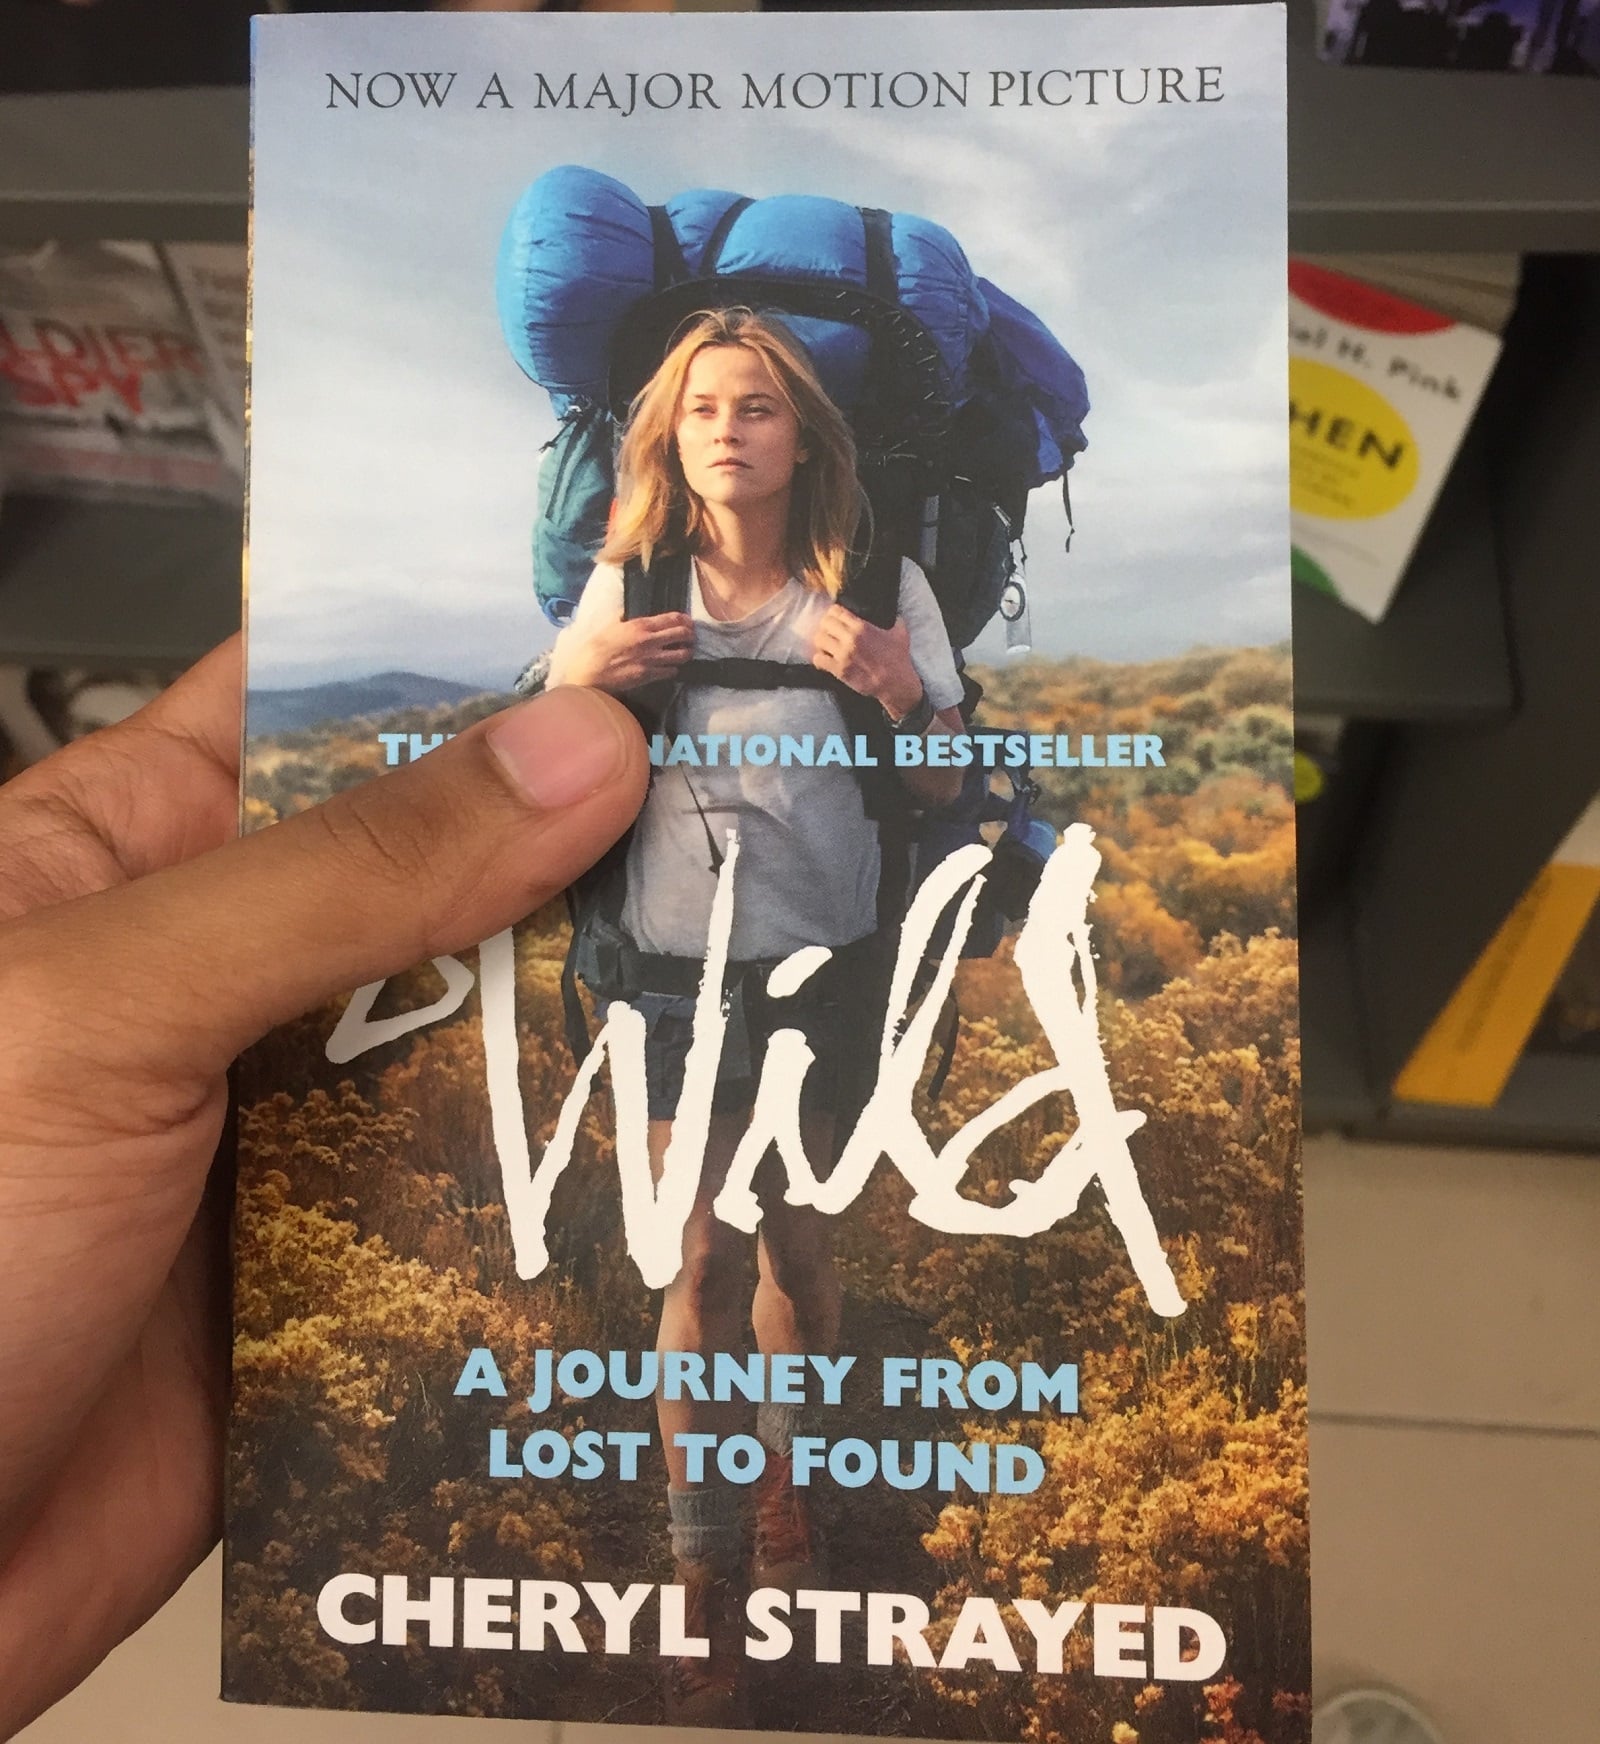 <p><span>“Wild” by Cheryl Strayed is a powerful memoir of self-discovery and healing. The book recounts her solo hike along the Pacific Crest Trail, a journey she undertook in the wake of personal tragedies. Strayed’s narrative is raw and honest, capturing both the physical challenges of her trek and the emotional journey of confronting her past and finding her strength. The book is a testament to nature’s transformative power and the human spirit’s resilience. </span></p> <p><b>Insider’s Tip: </b><span>Reflect on the therapeutic aspects of travel and nature as you read and how stepping out of your comfort zone can lead to profound personal growth.</span></p>